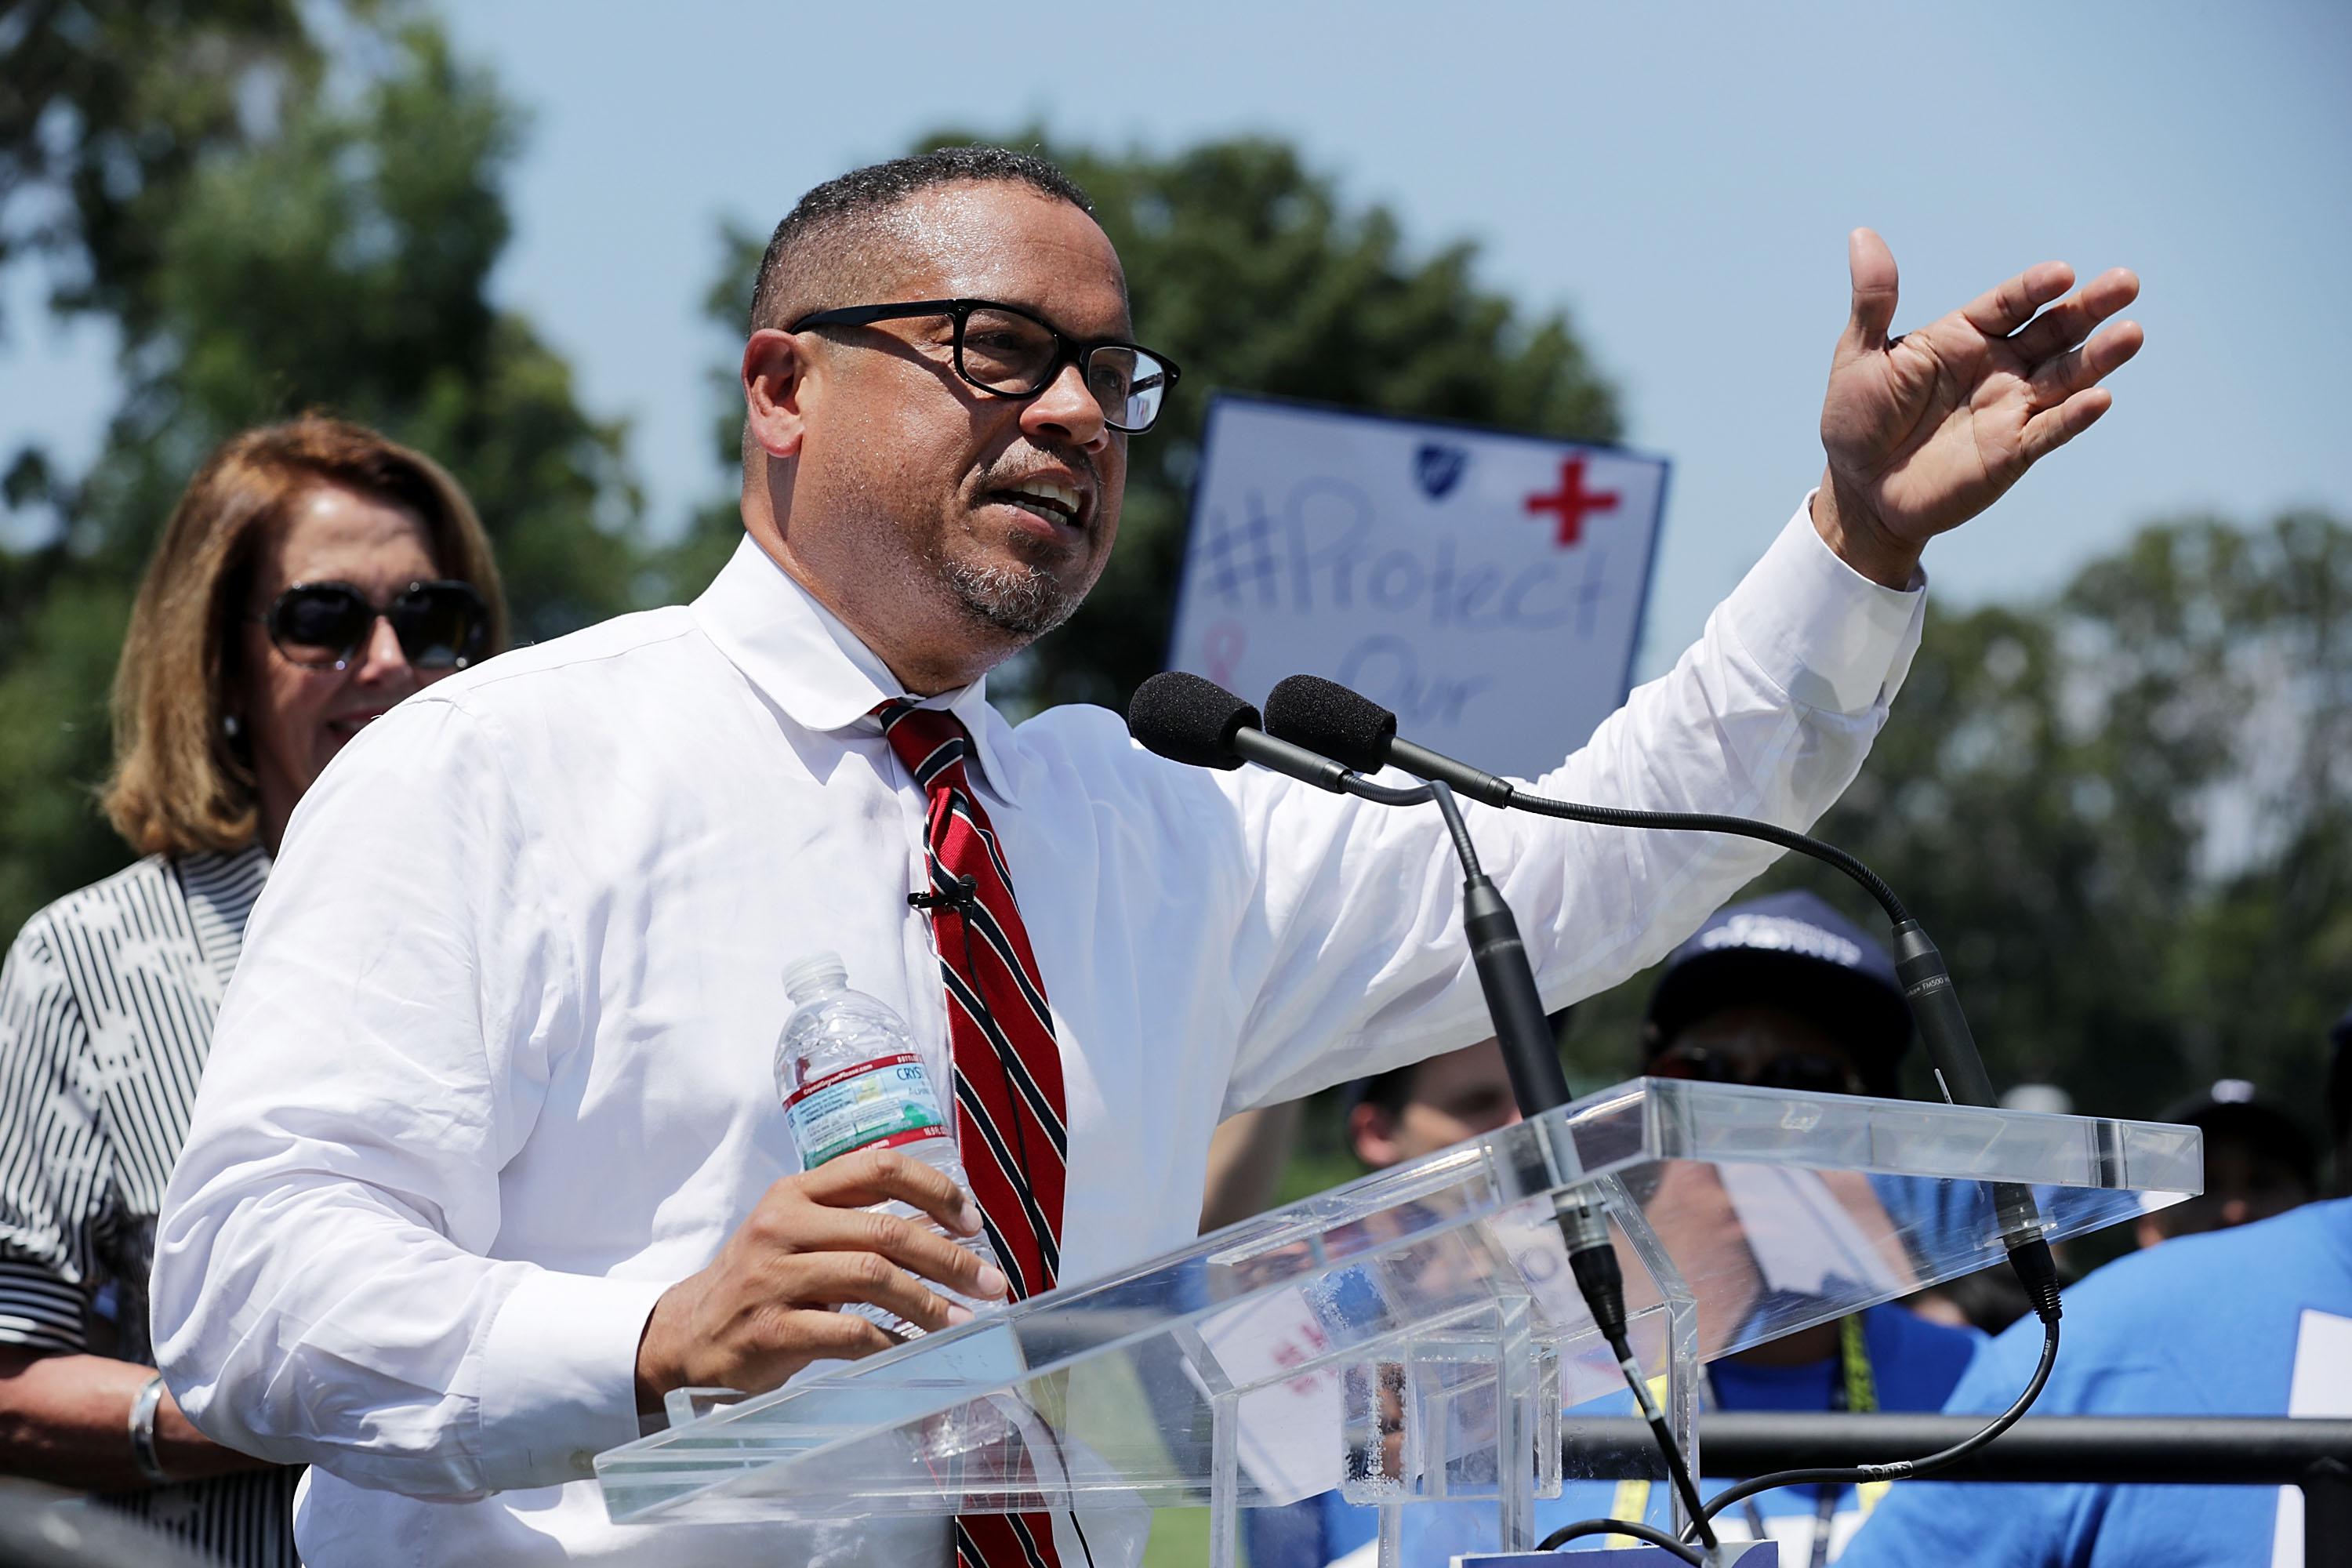 Ellison, in a white shirt and red tie, raises his arm to gesture to a crowd as he speaks. Behind him, people wave signs.